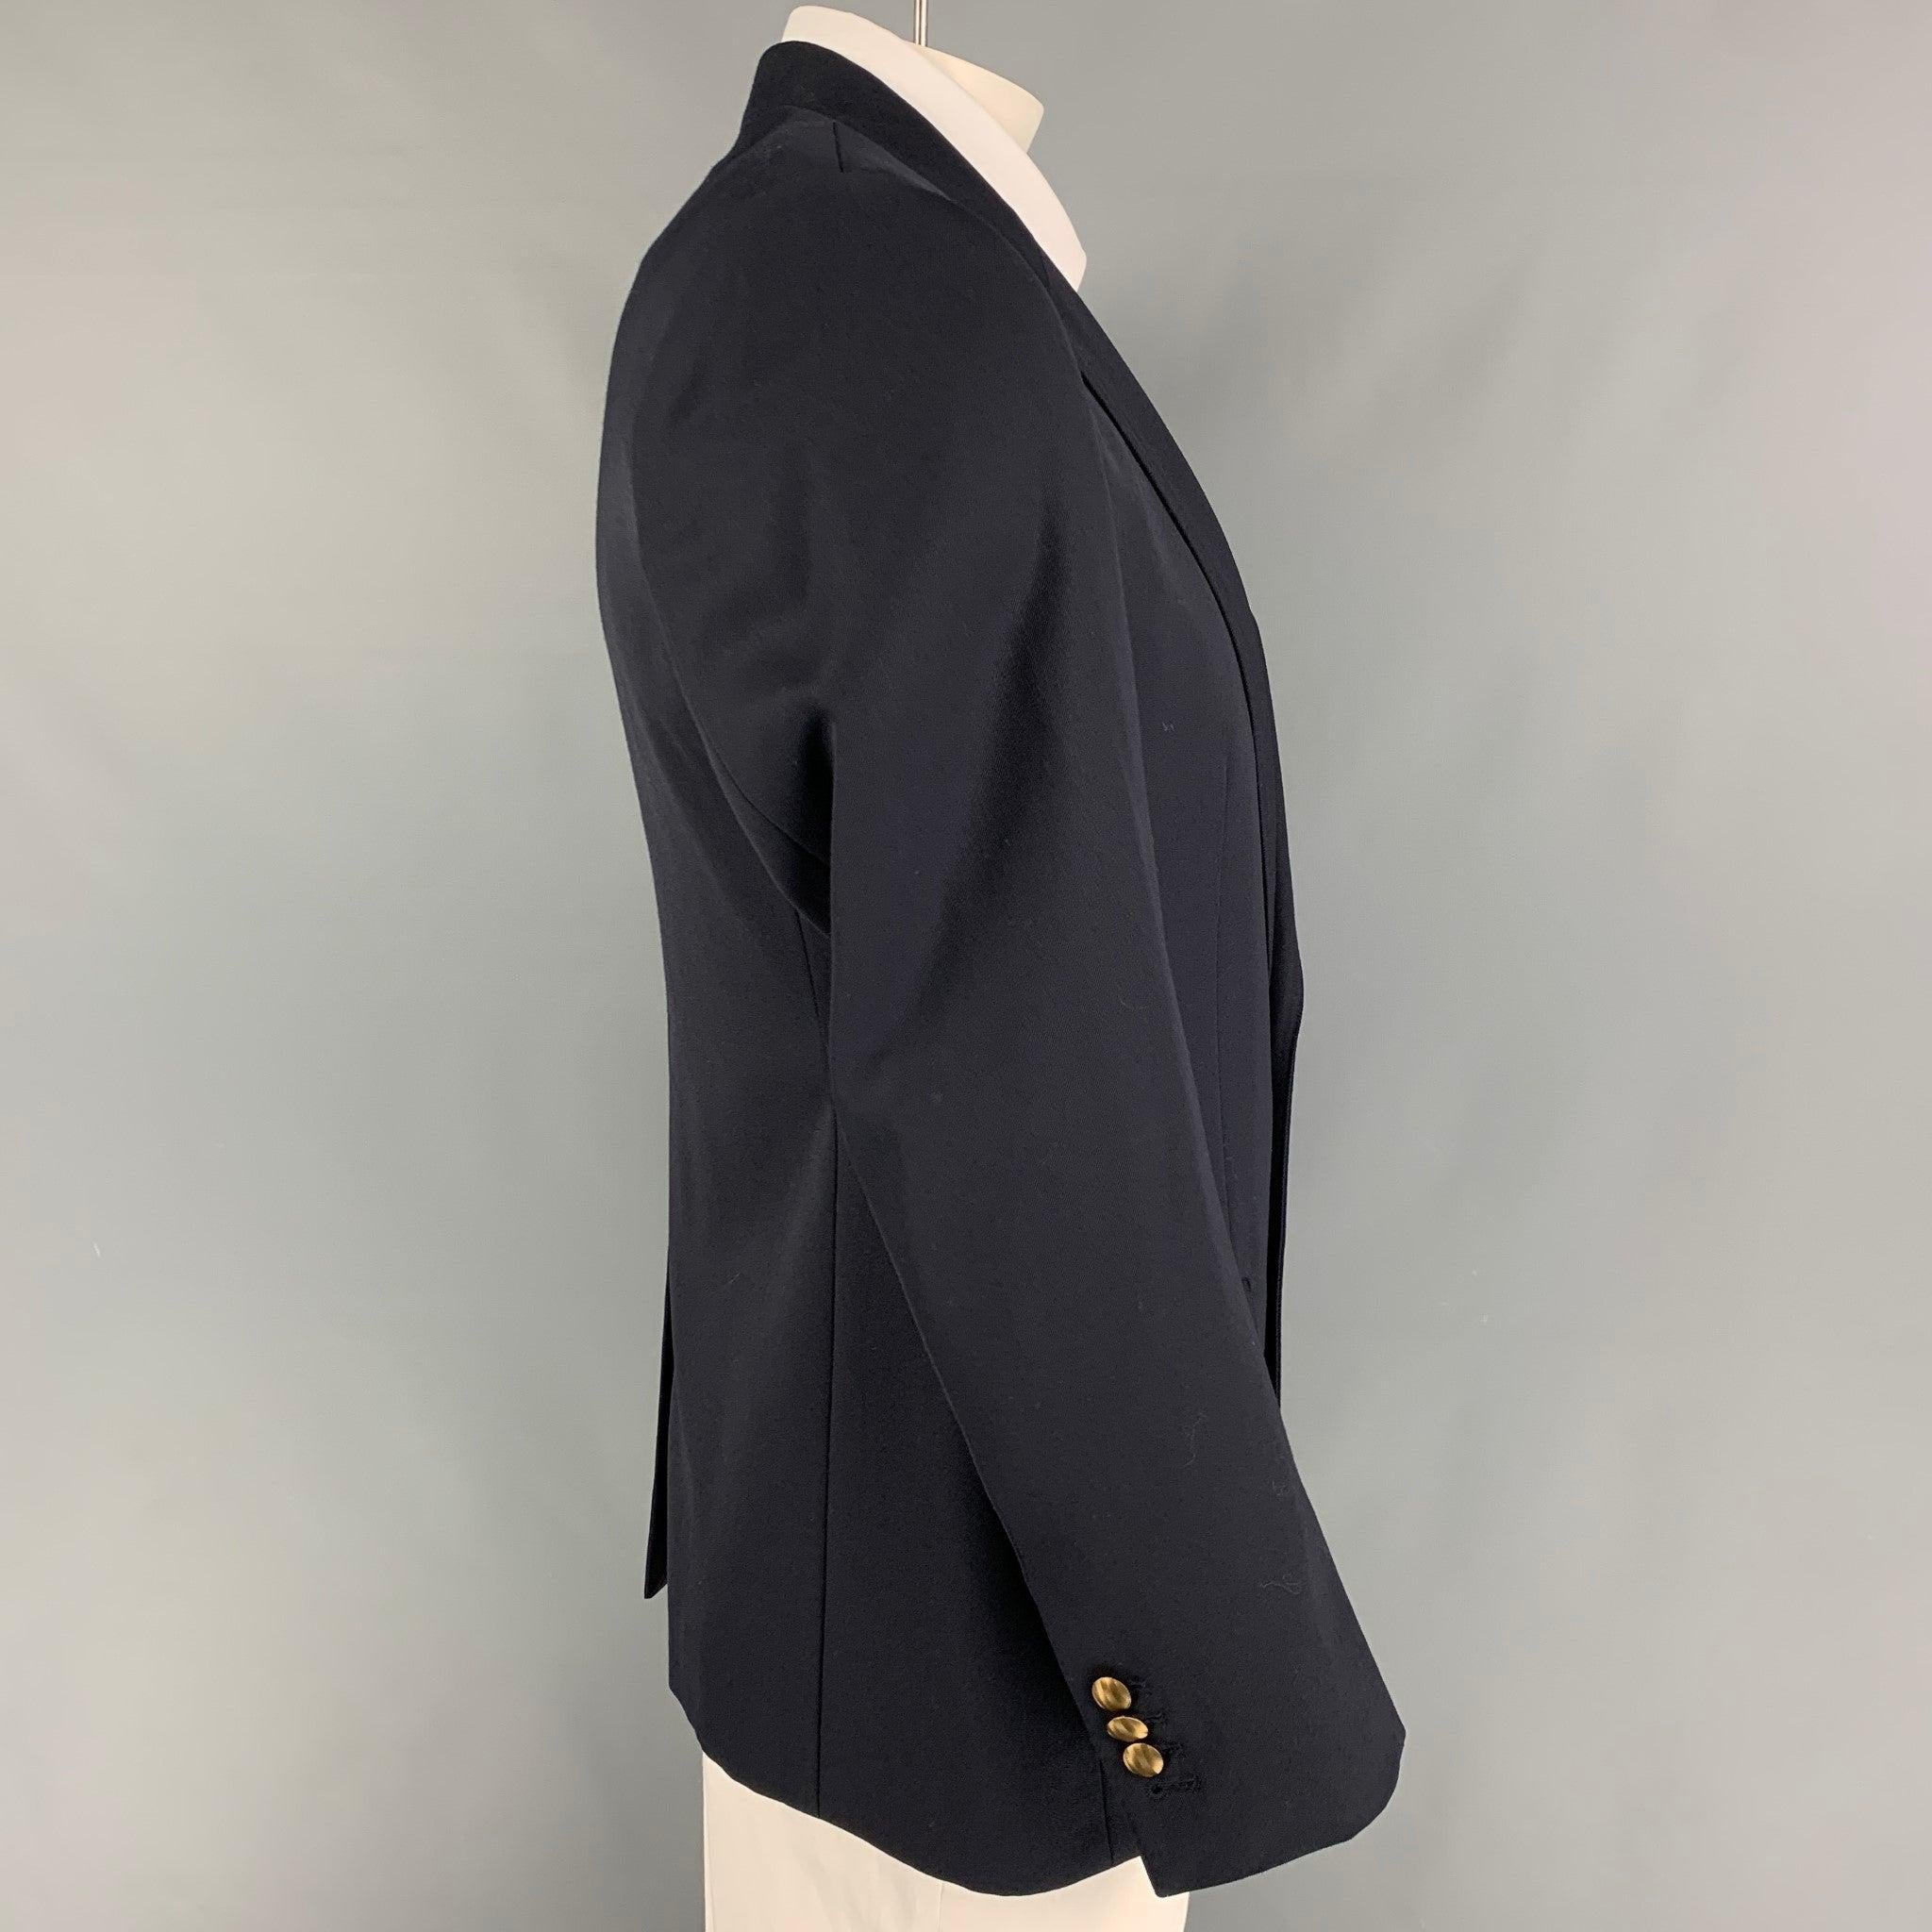 DOLCE & GABBANA 'Martini' sport coat comes in a navy wool / silk with a full liner featuring a peak lapel, flap pockets, single back vent, and a double button closure. Made in Italy.
Excellent
Pre-Owned Condition. 

Marked:   52 

Measurements: 
